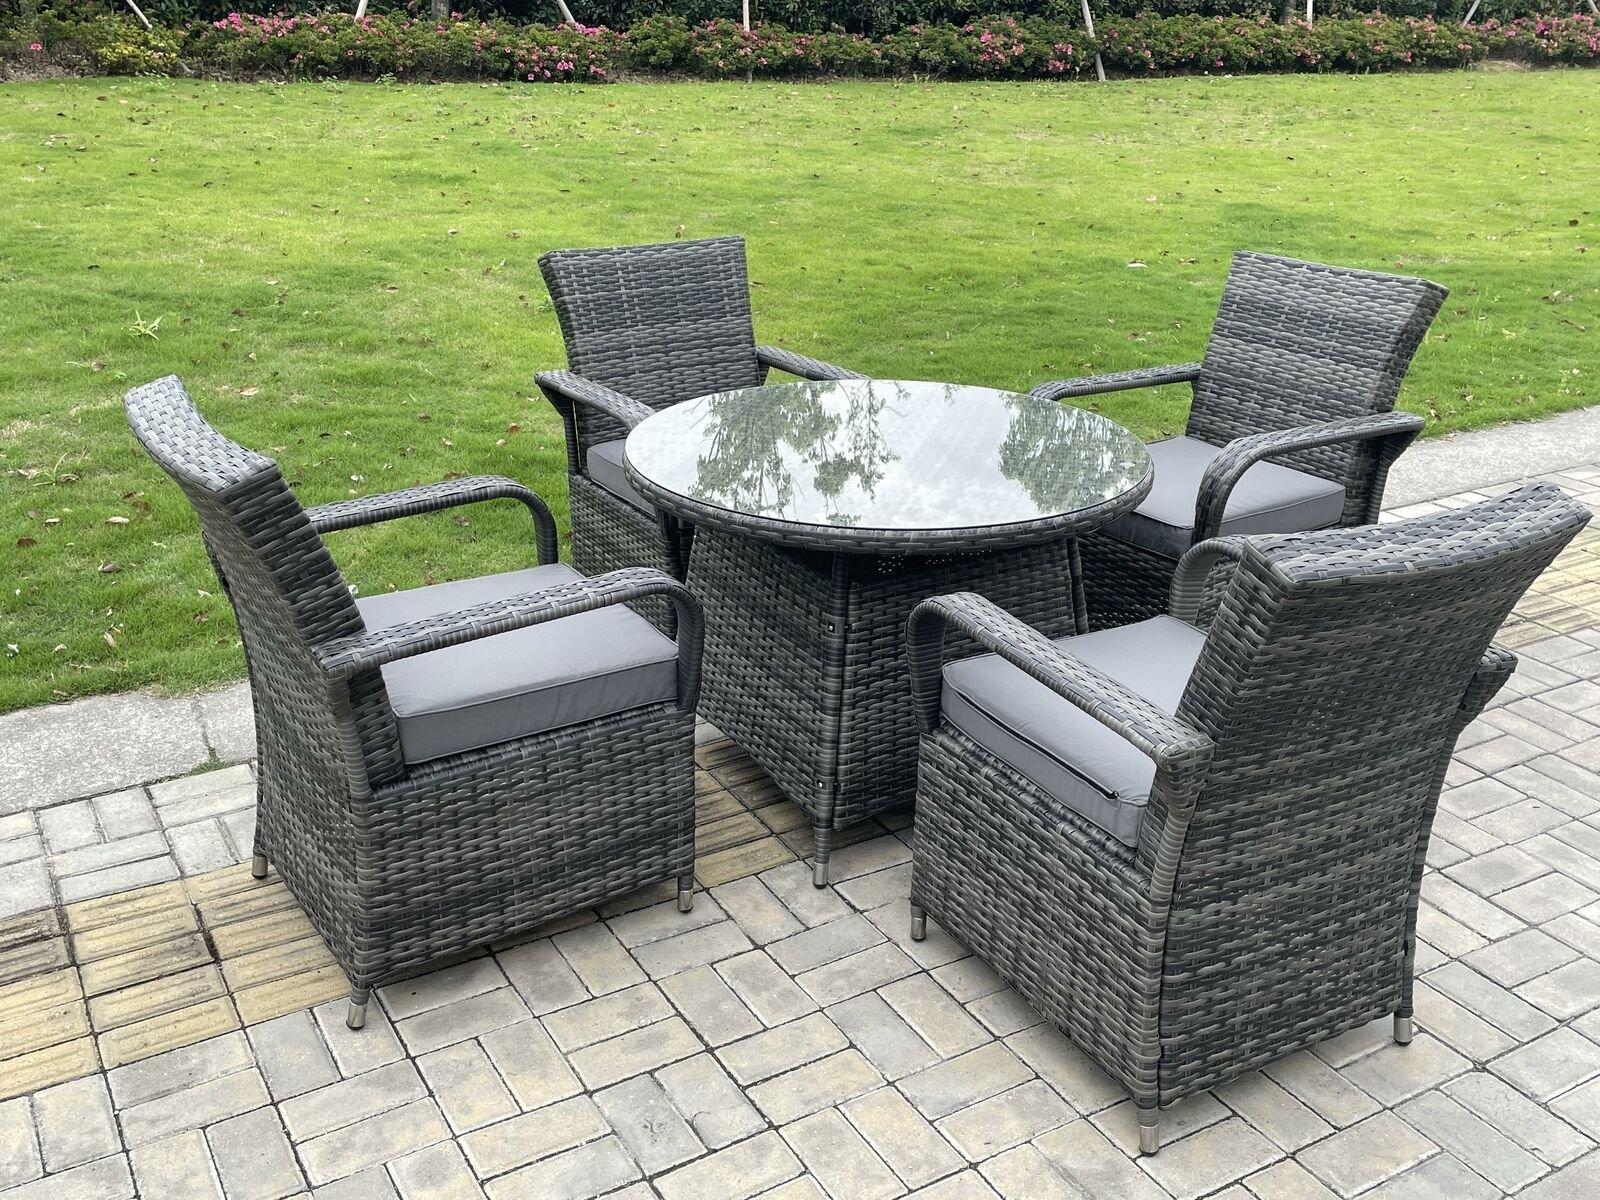 Outdoor Rattan Garden Furniture Dining Set Table And Chair Set Wicker Patio 4 Chairs Plus Round Tabl